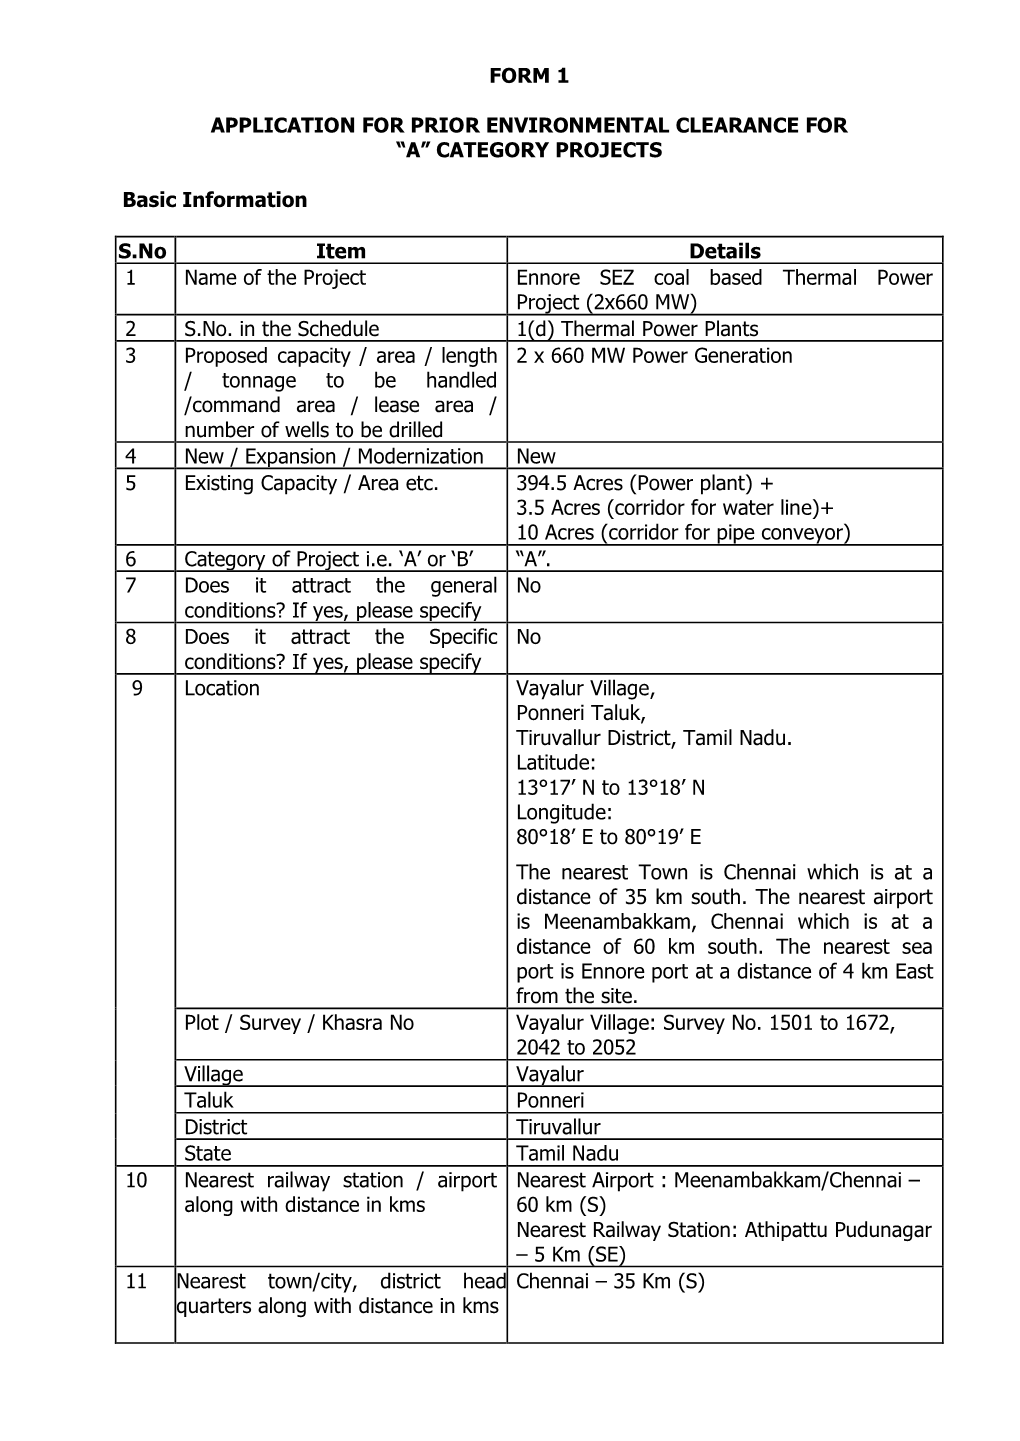 Form 1 Application for Prior Environmental Clearance